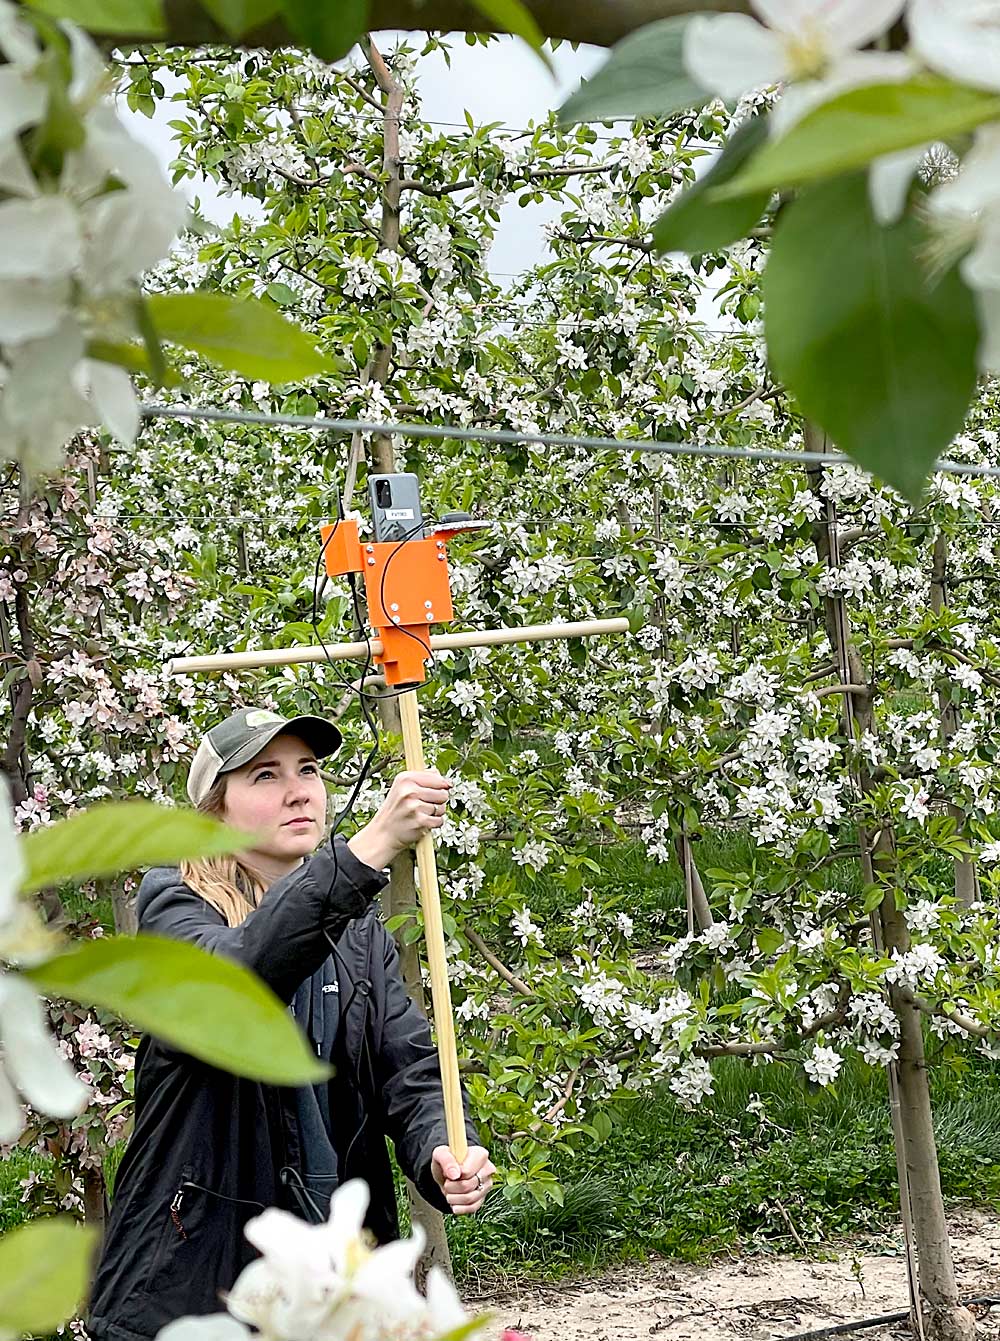 Grower collaborator Victoria Wittenbach uses a smartphone paired with an enhanced GPS sensor and extra battery, mounted on a pole for stability, to take images of an apple tree to count blossoms as part of Farm Vision Technologies’ research and development earlier this year. The Minnesota-based company said it hopes to have tools available to help growers with crop load management next season. (Courtesy Farm Vision Technologies)